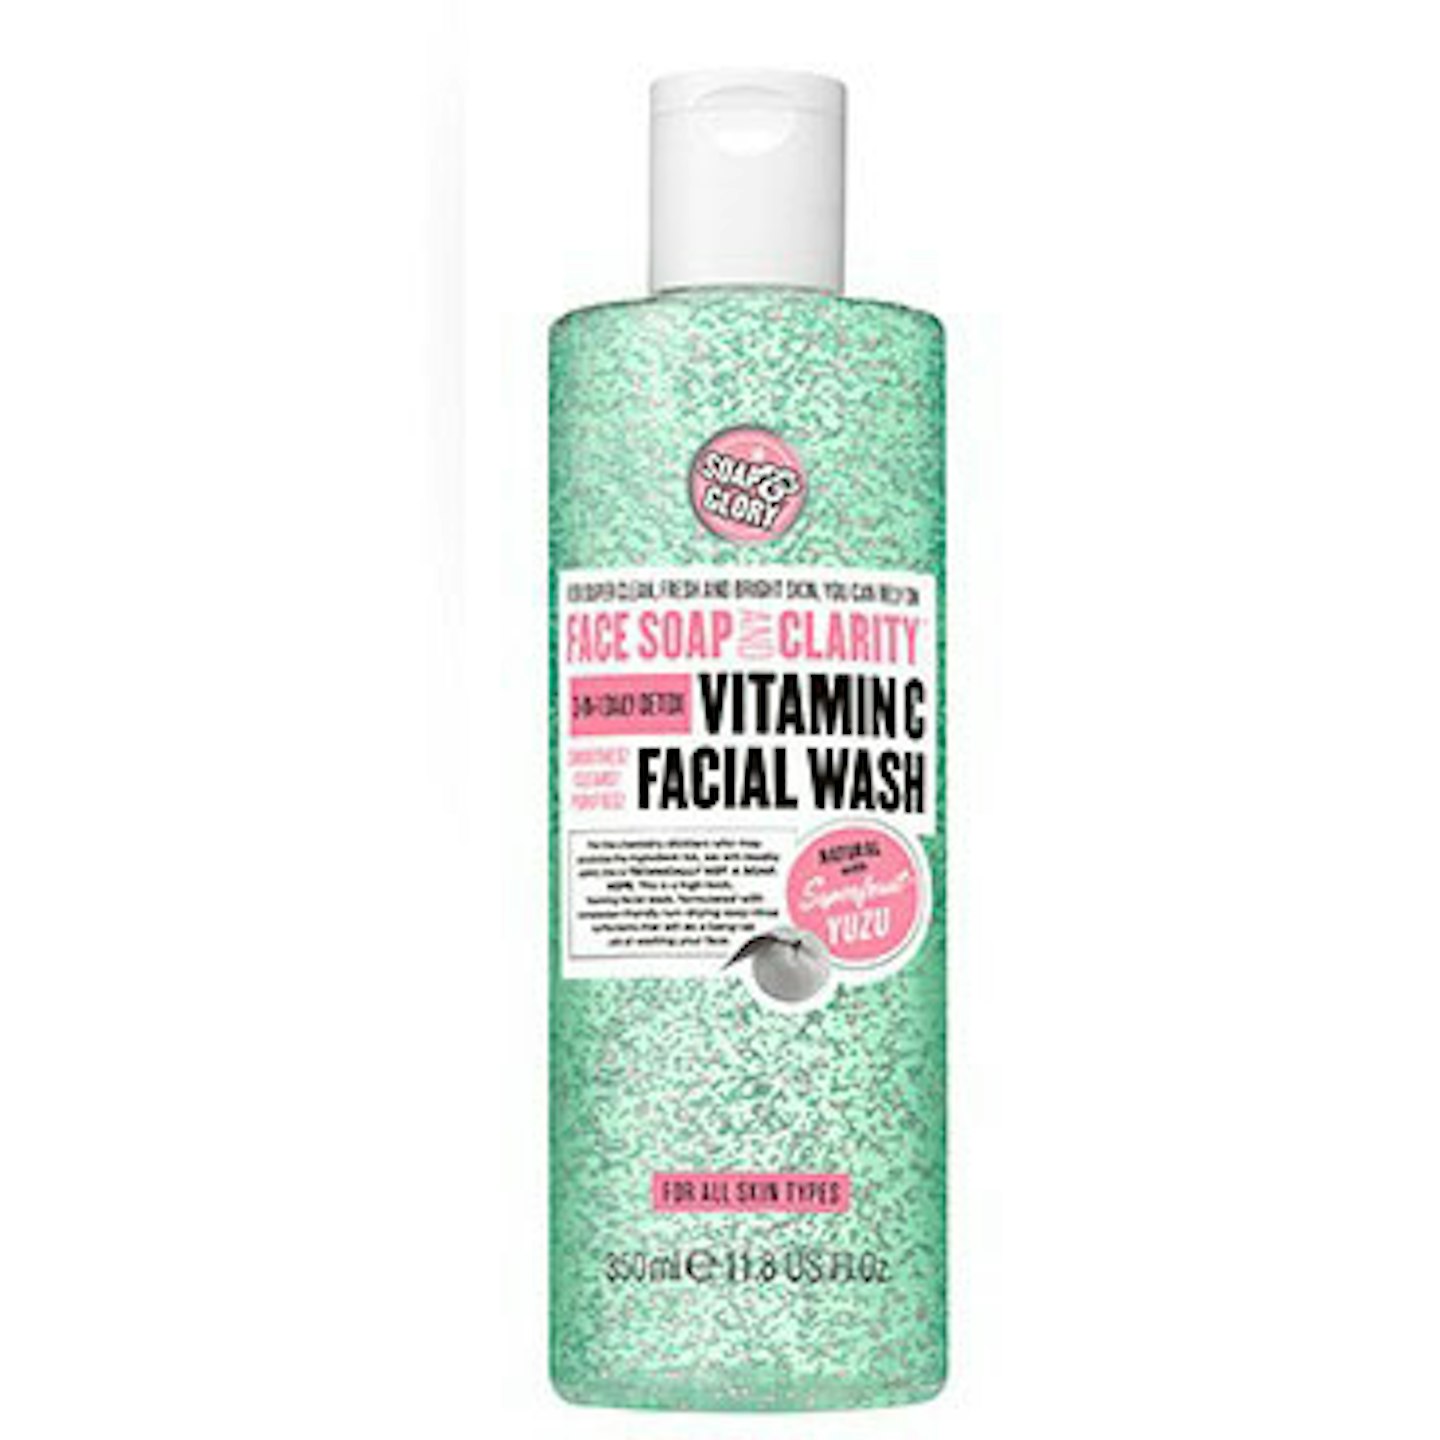 Soap and Glory 3-in-1 Daily Vitamin C Facial Wash, £8